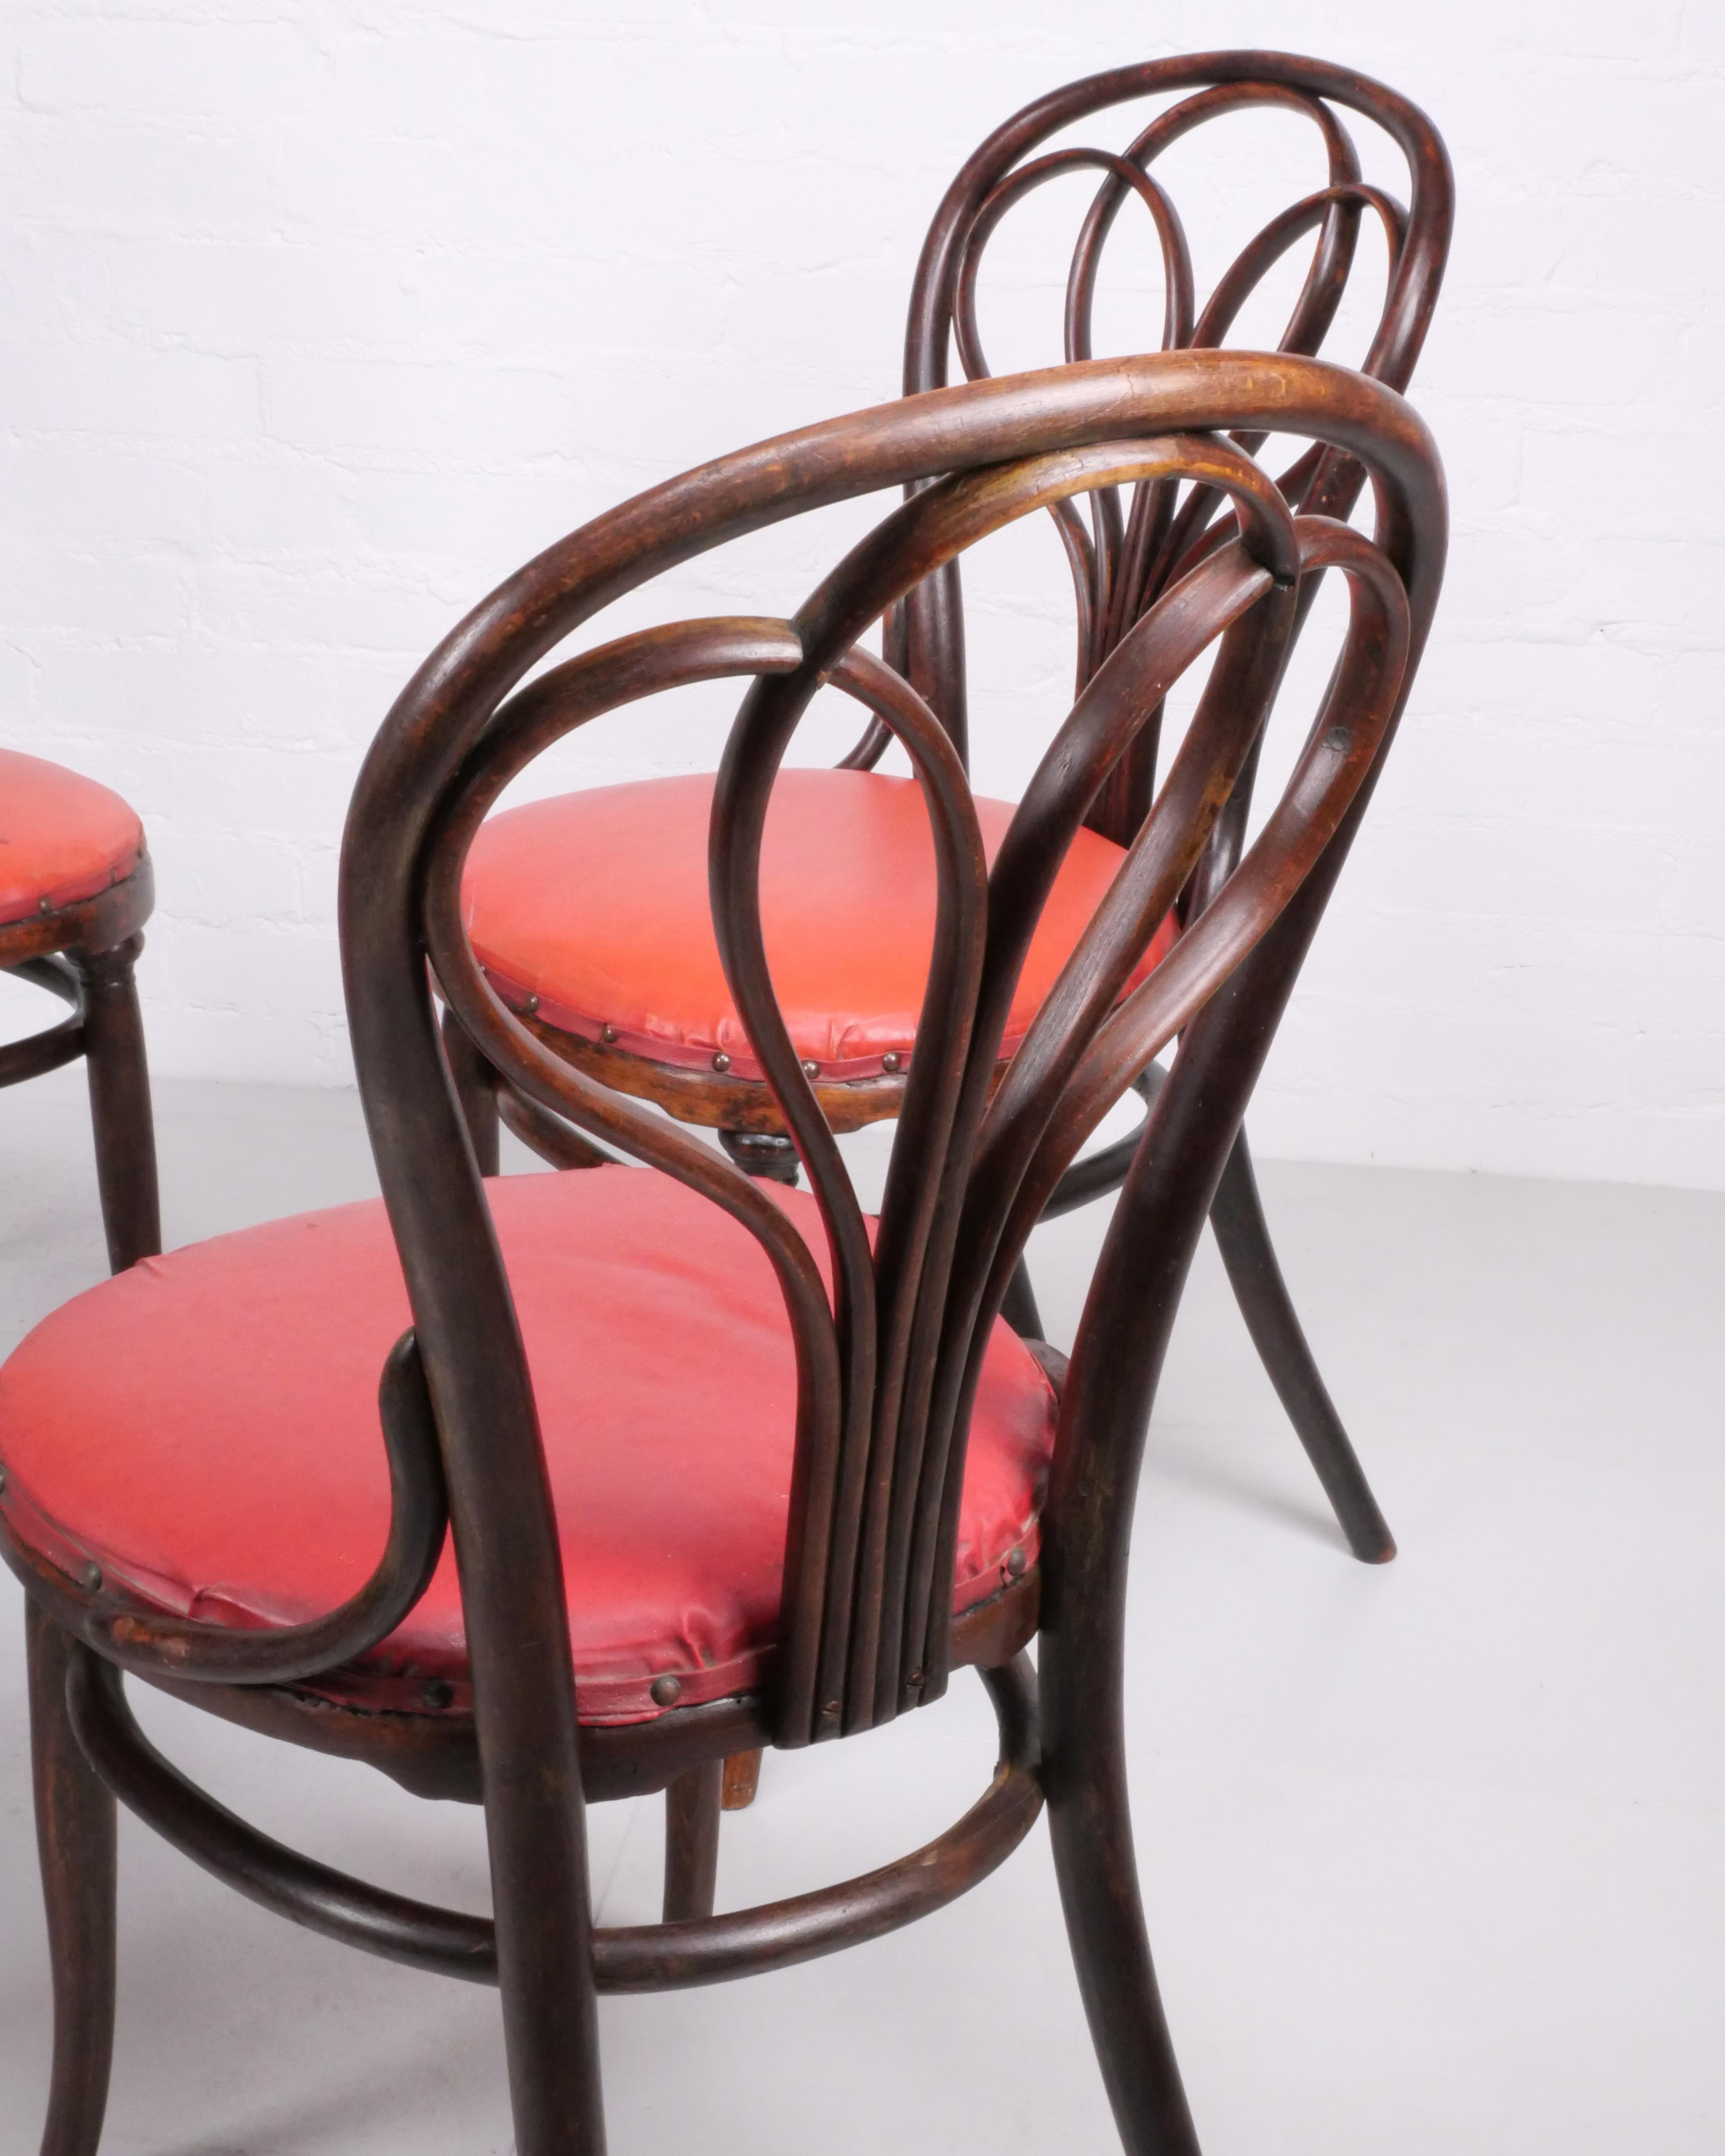 Plywood Set of 4 no.25 dining chairs by Gebrüder Thonet, c. 1870 For Sale